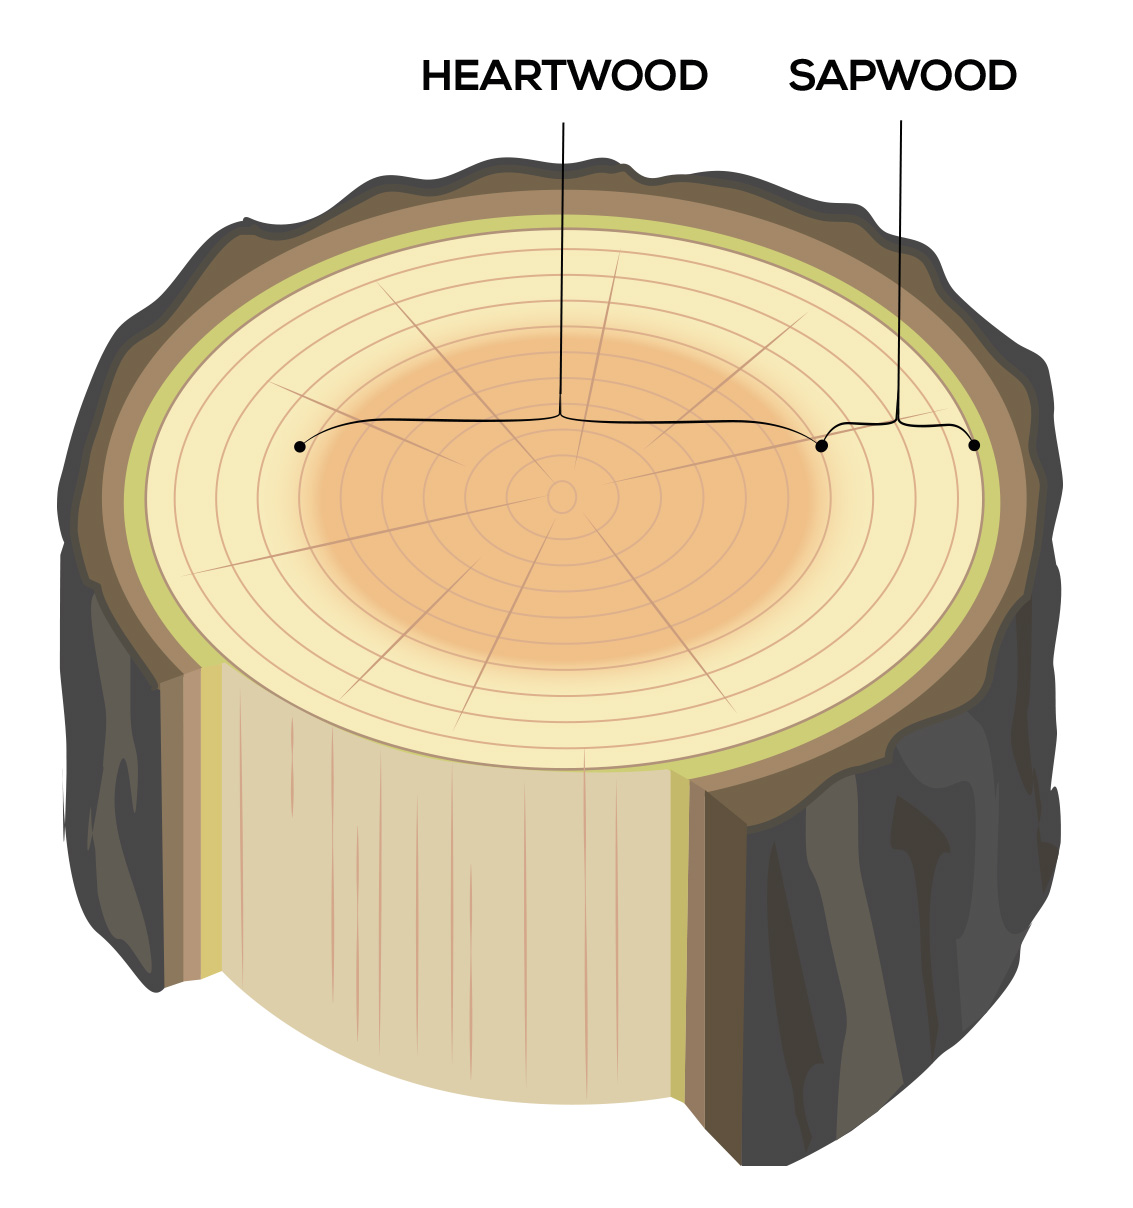 An illustration of a tree stump showing heartwood and sapwood in the different parts of the wood. 